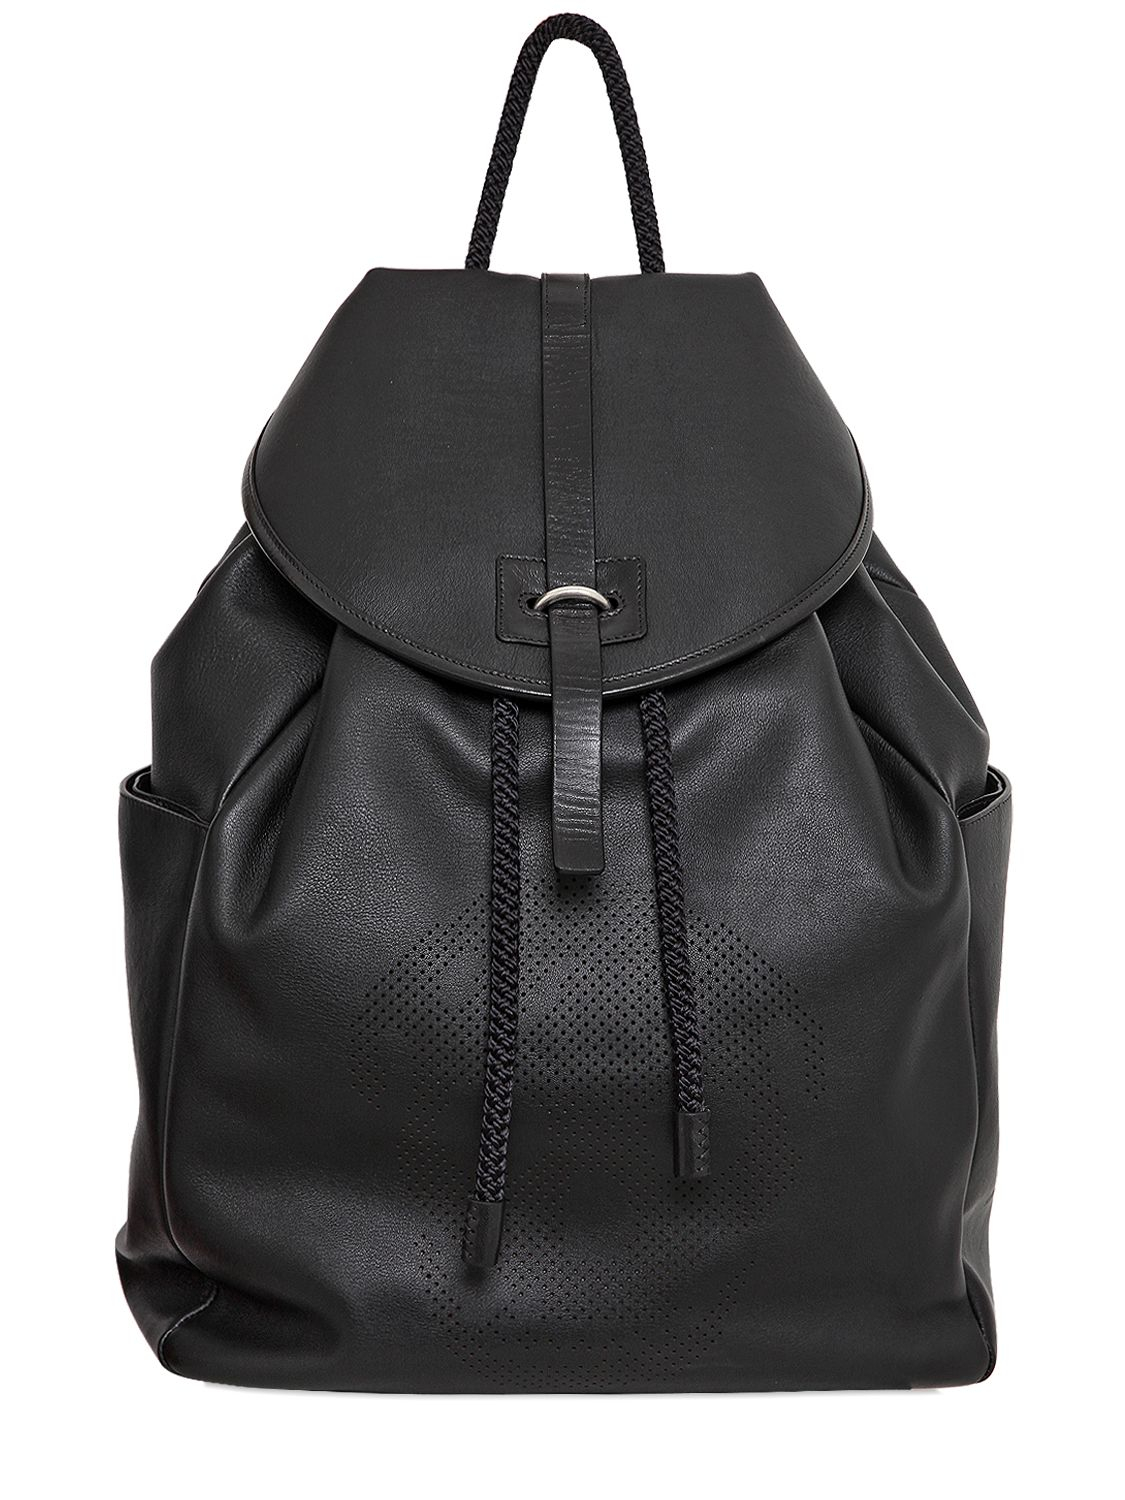 Lyst - Alexander Mcqueen Perforated Skull Soft Leather Backpack in Black for Men